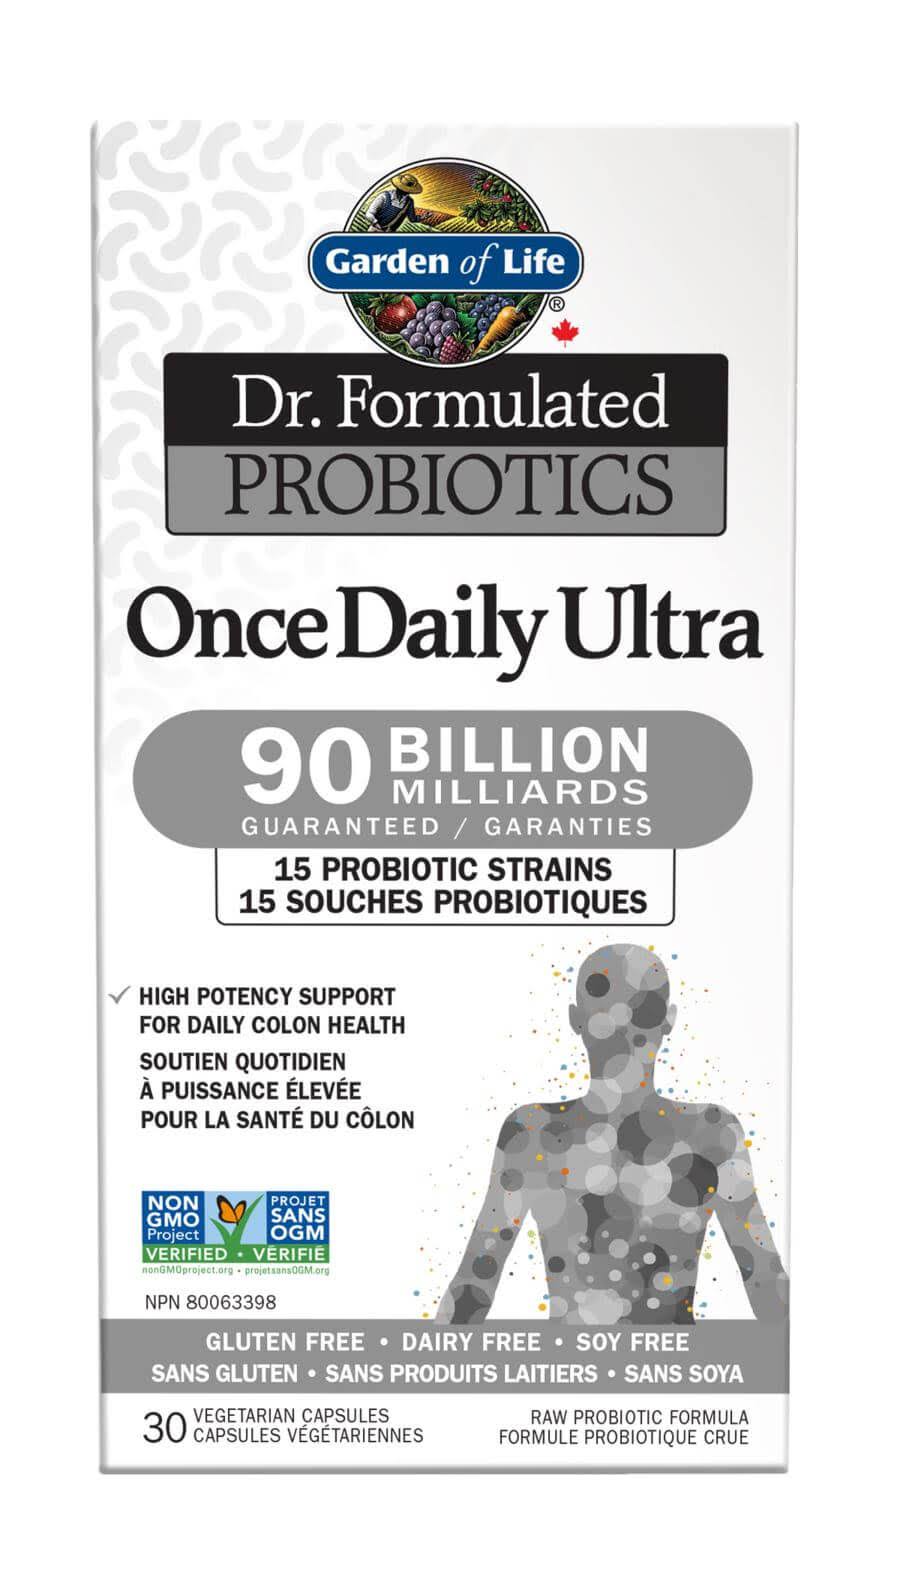 Garden of Life Dr. Formulated Probiotics - Once Daily Ultra Capsules